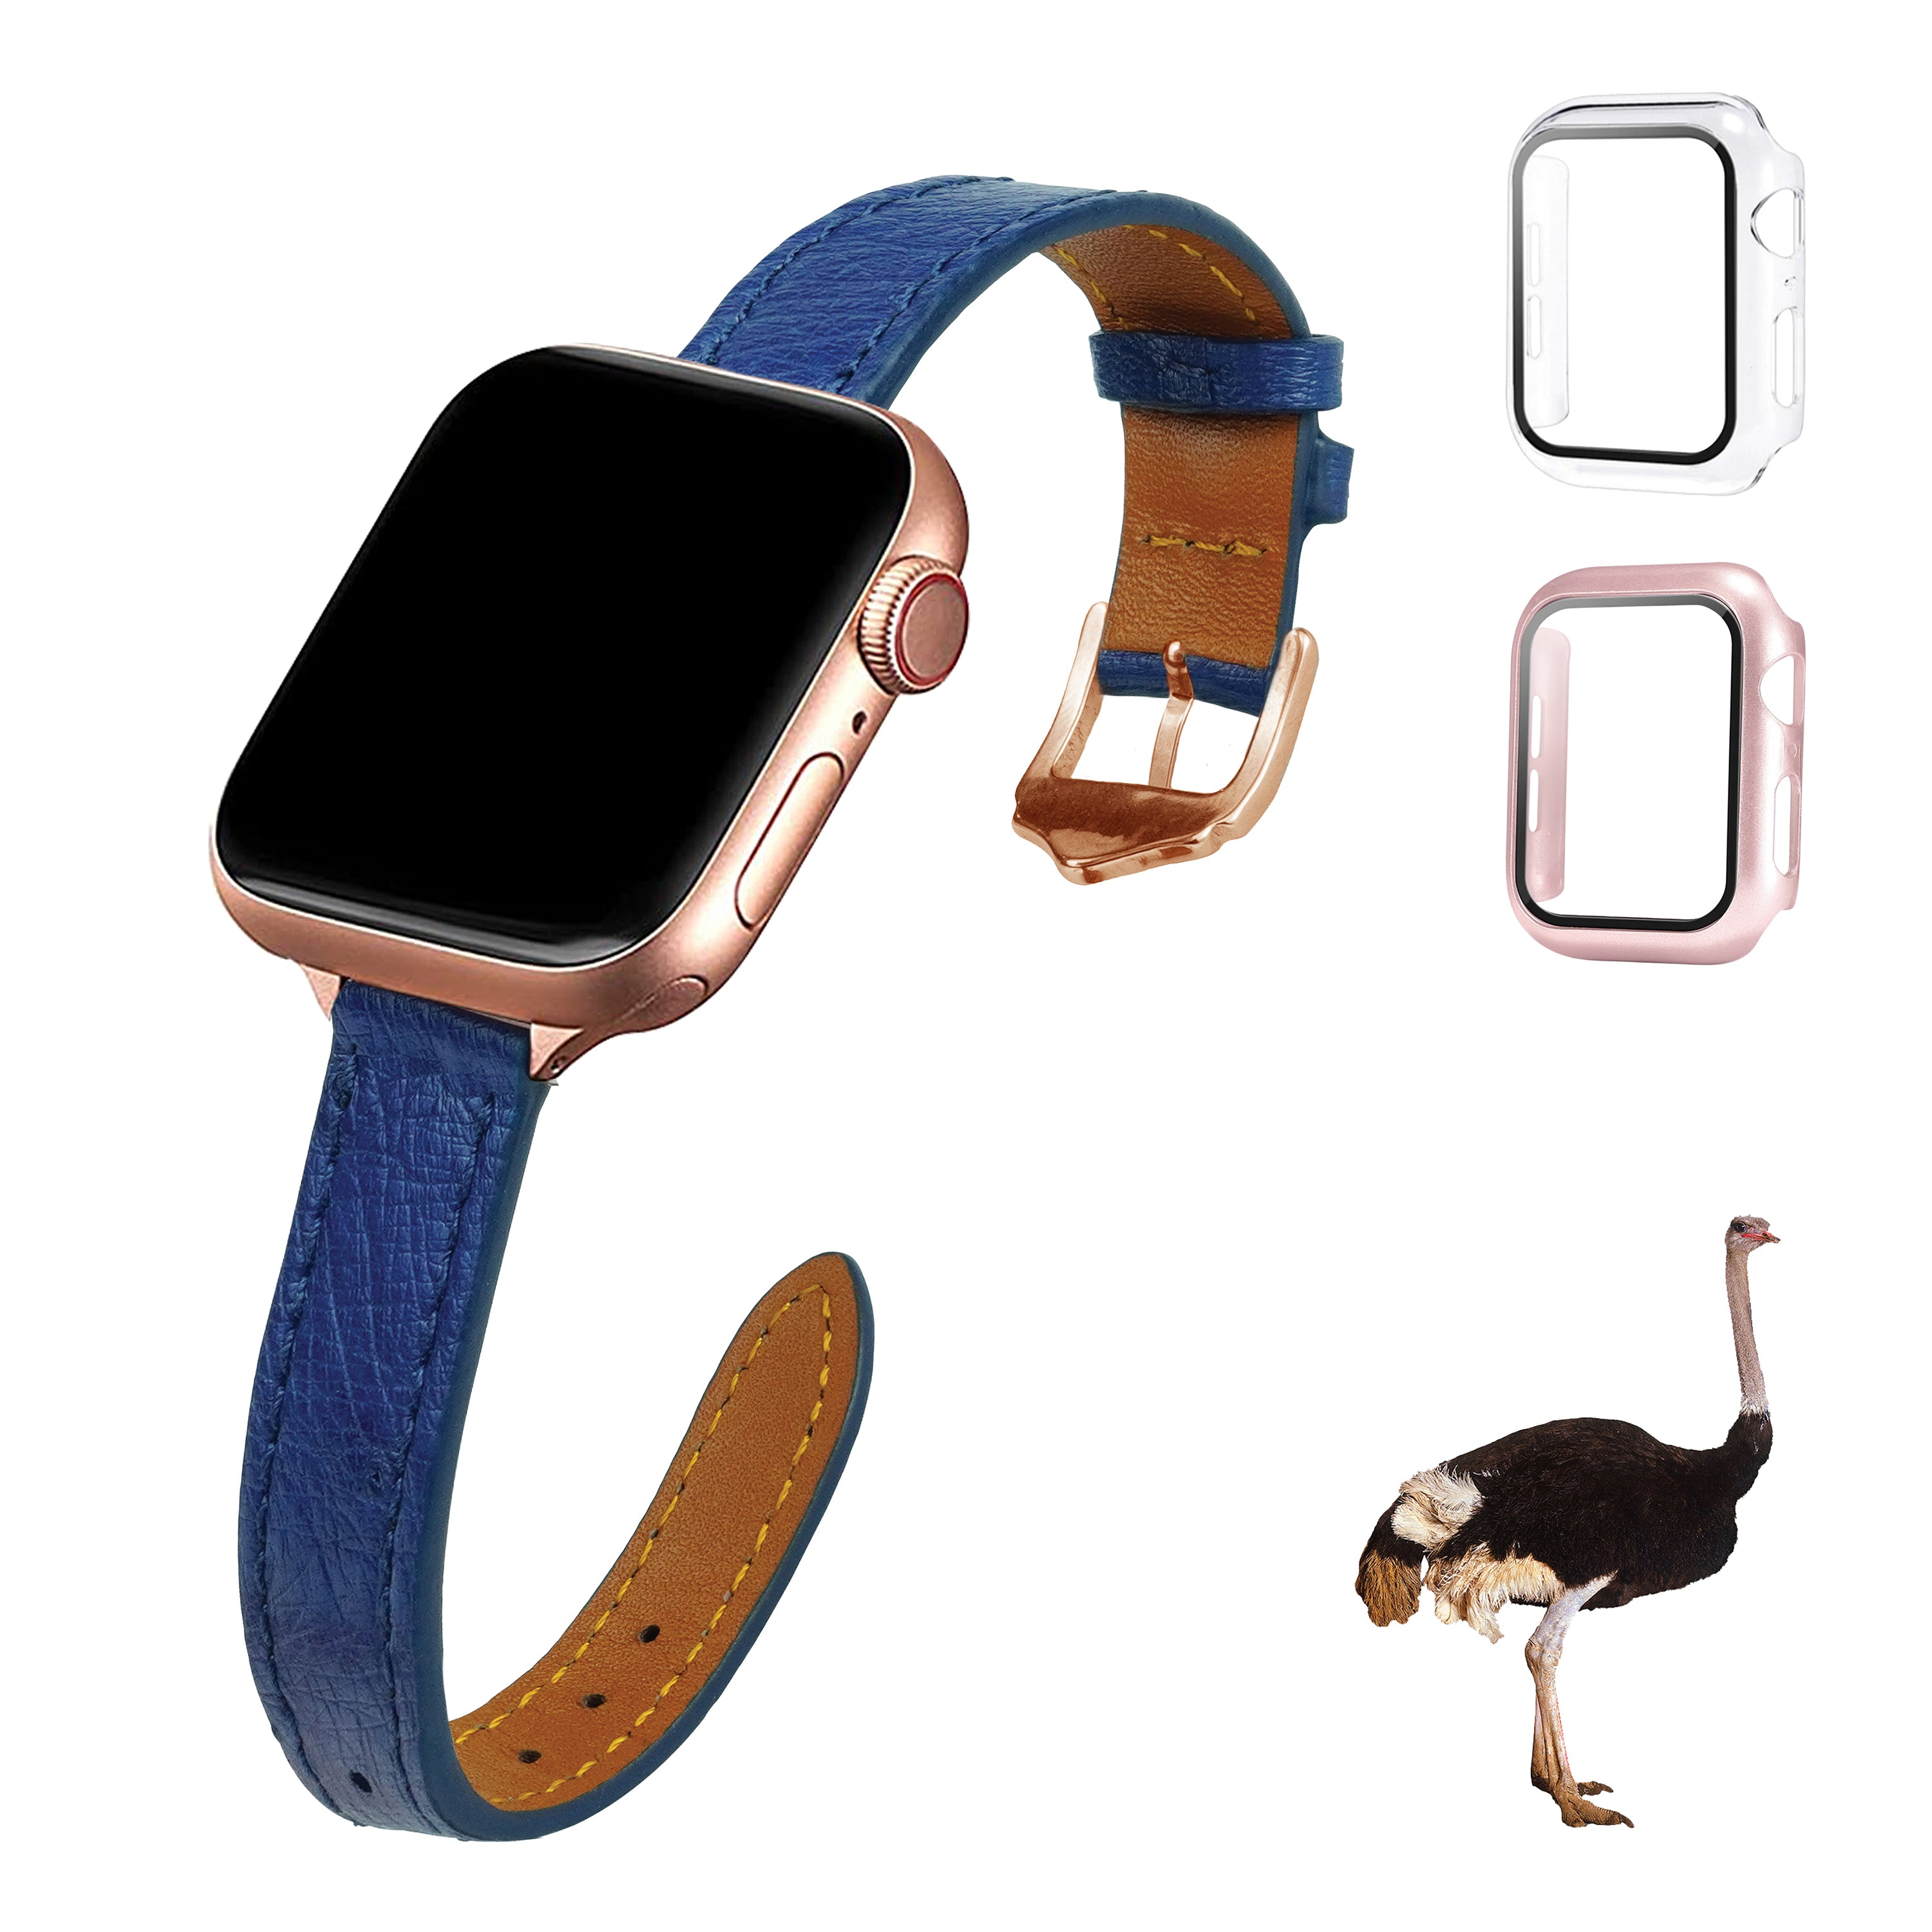 Blue Flat Ostrich Leather Band Compatible Apple Watch Iwatch 44mm Screen Protector Case Black Adapter Replacement Strap For Smartwatch Series 4 5 6 SE Leather Handmade AW-184G-W-44MM